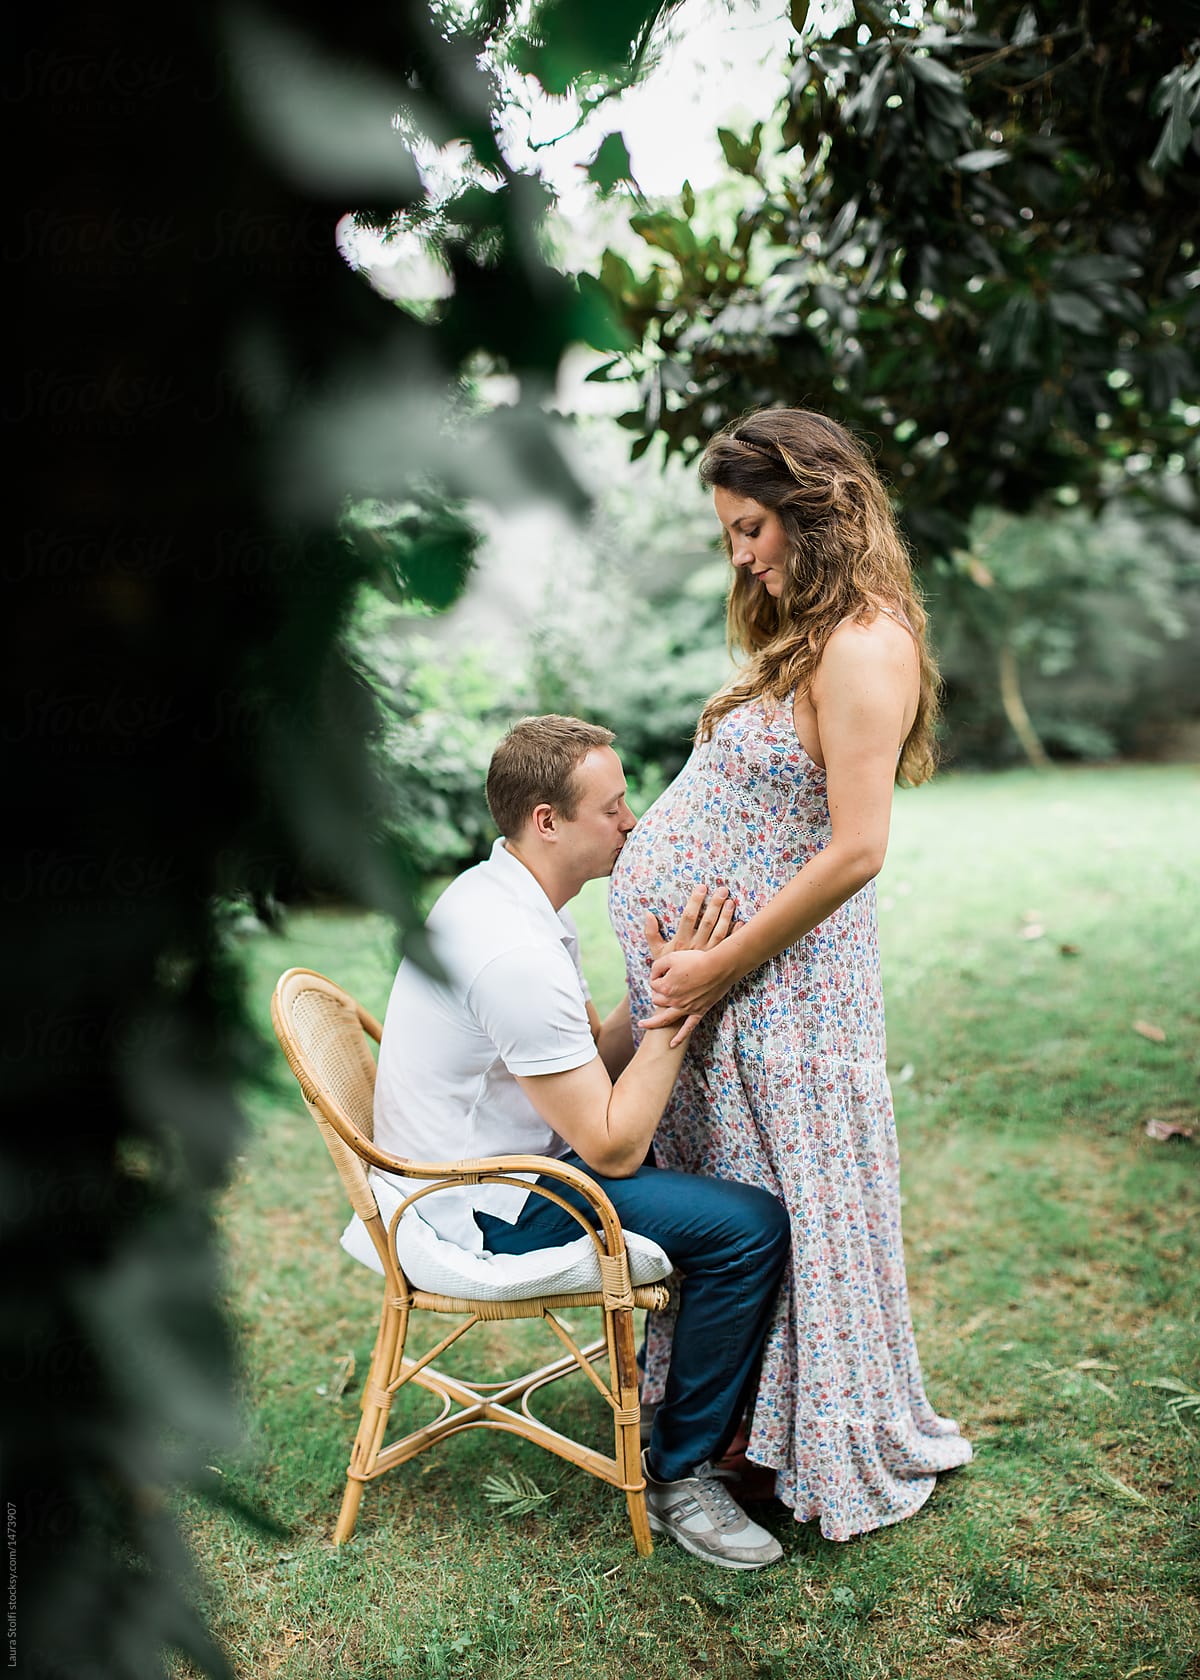 Maternity Session With Man Kissing Wifes Pregnant Belly By Stocksy Contributor Laura Stolfi